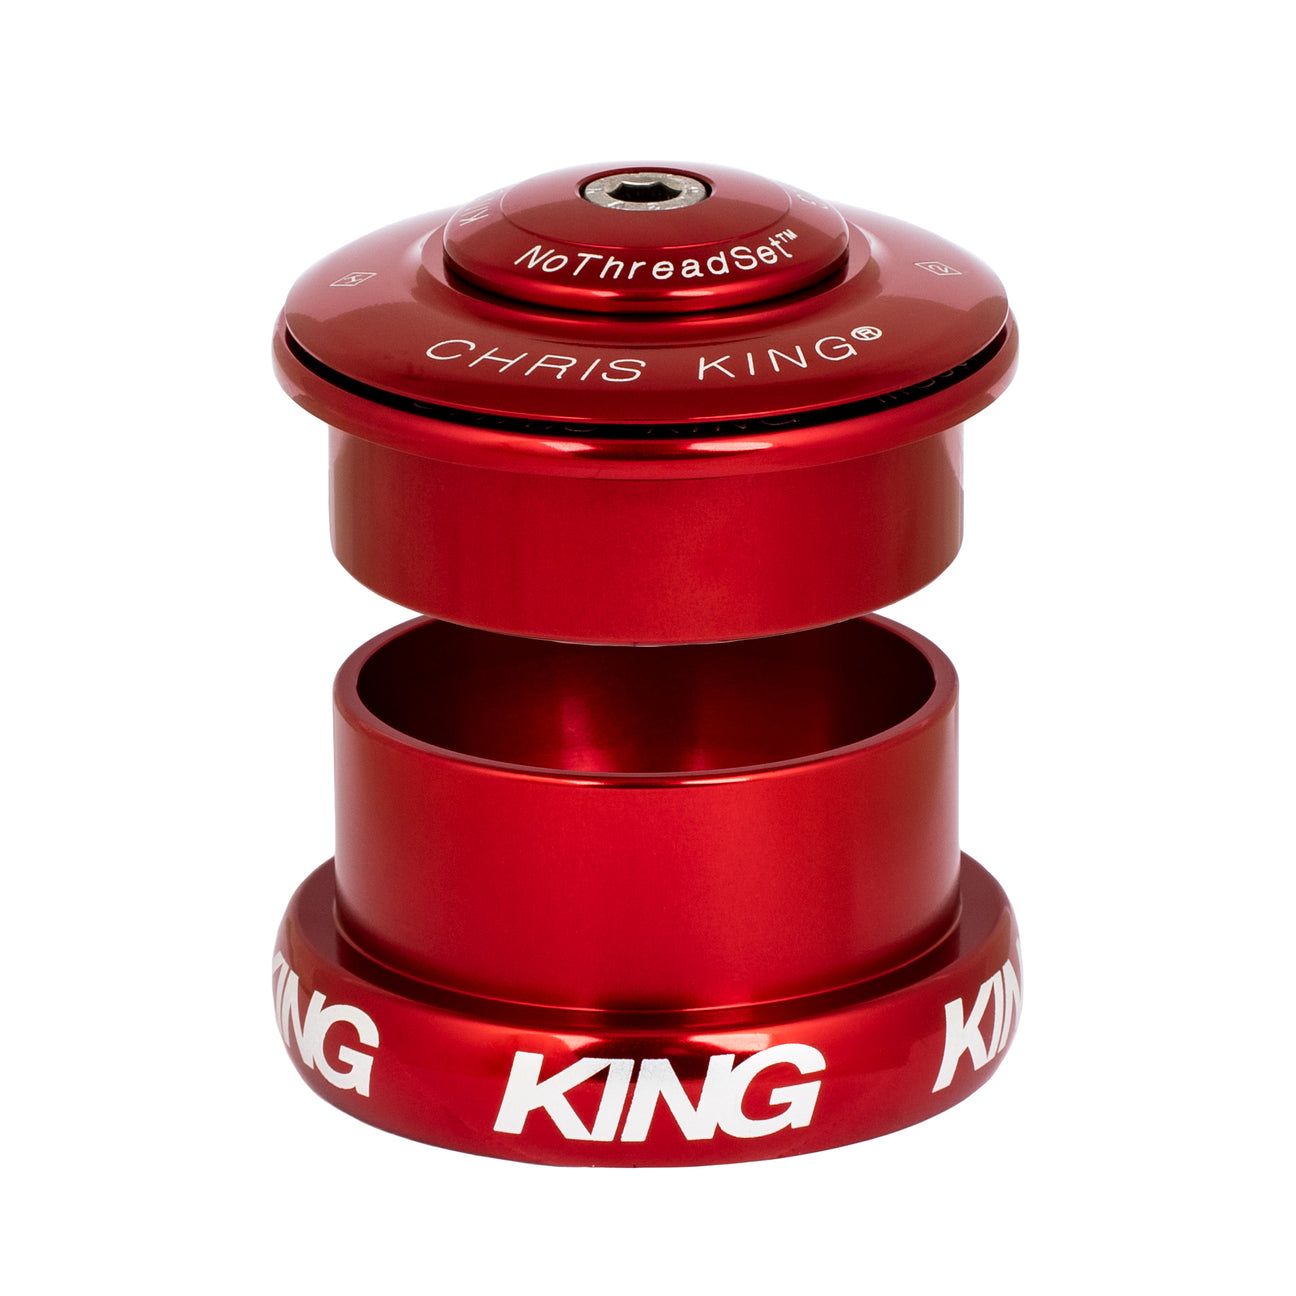 Chris King Inset 5 headset in red